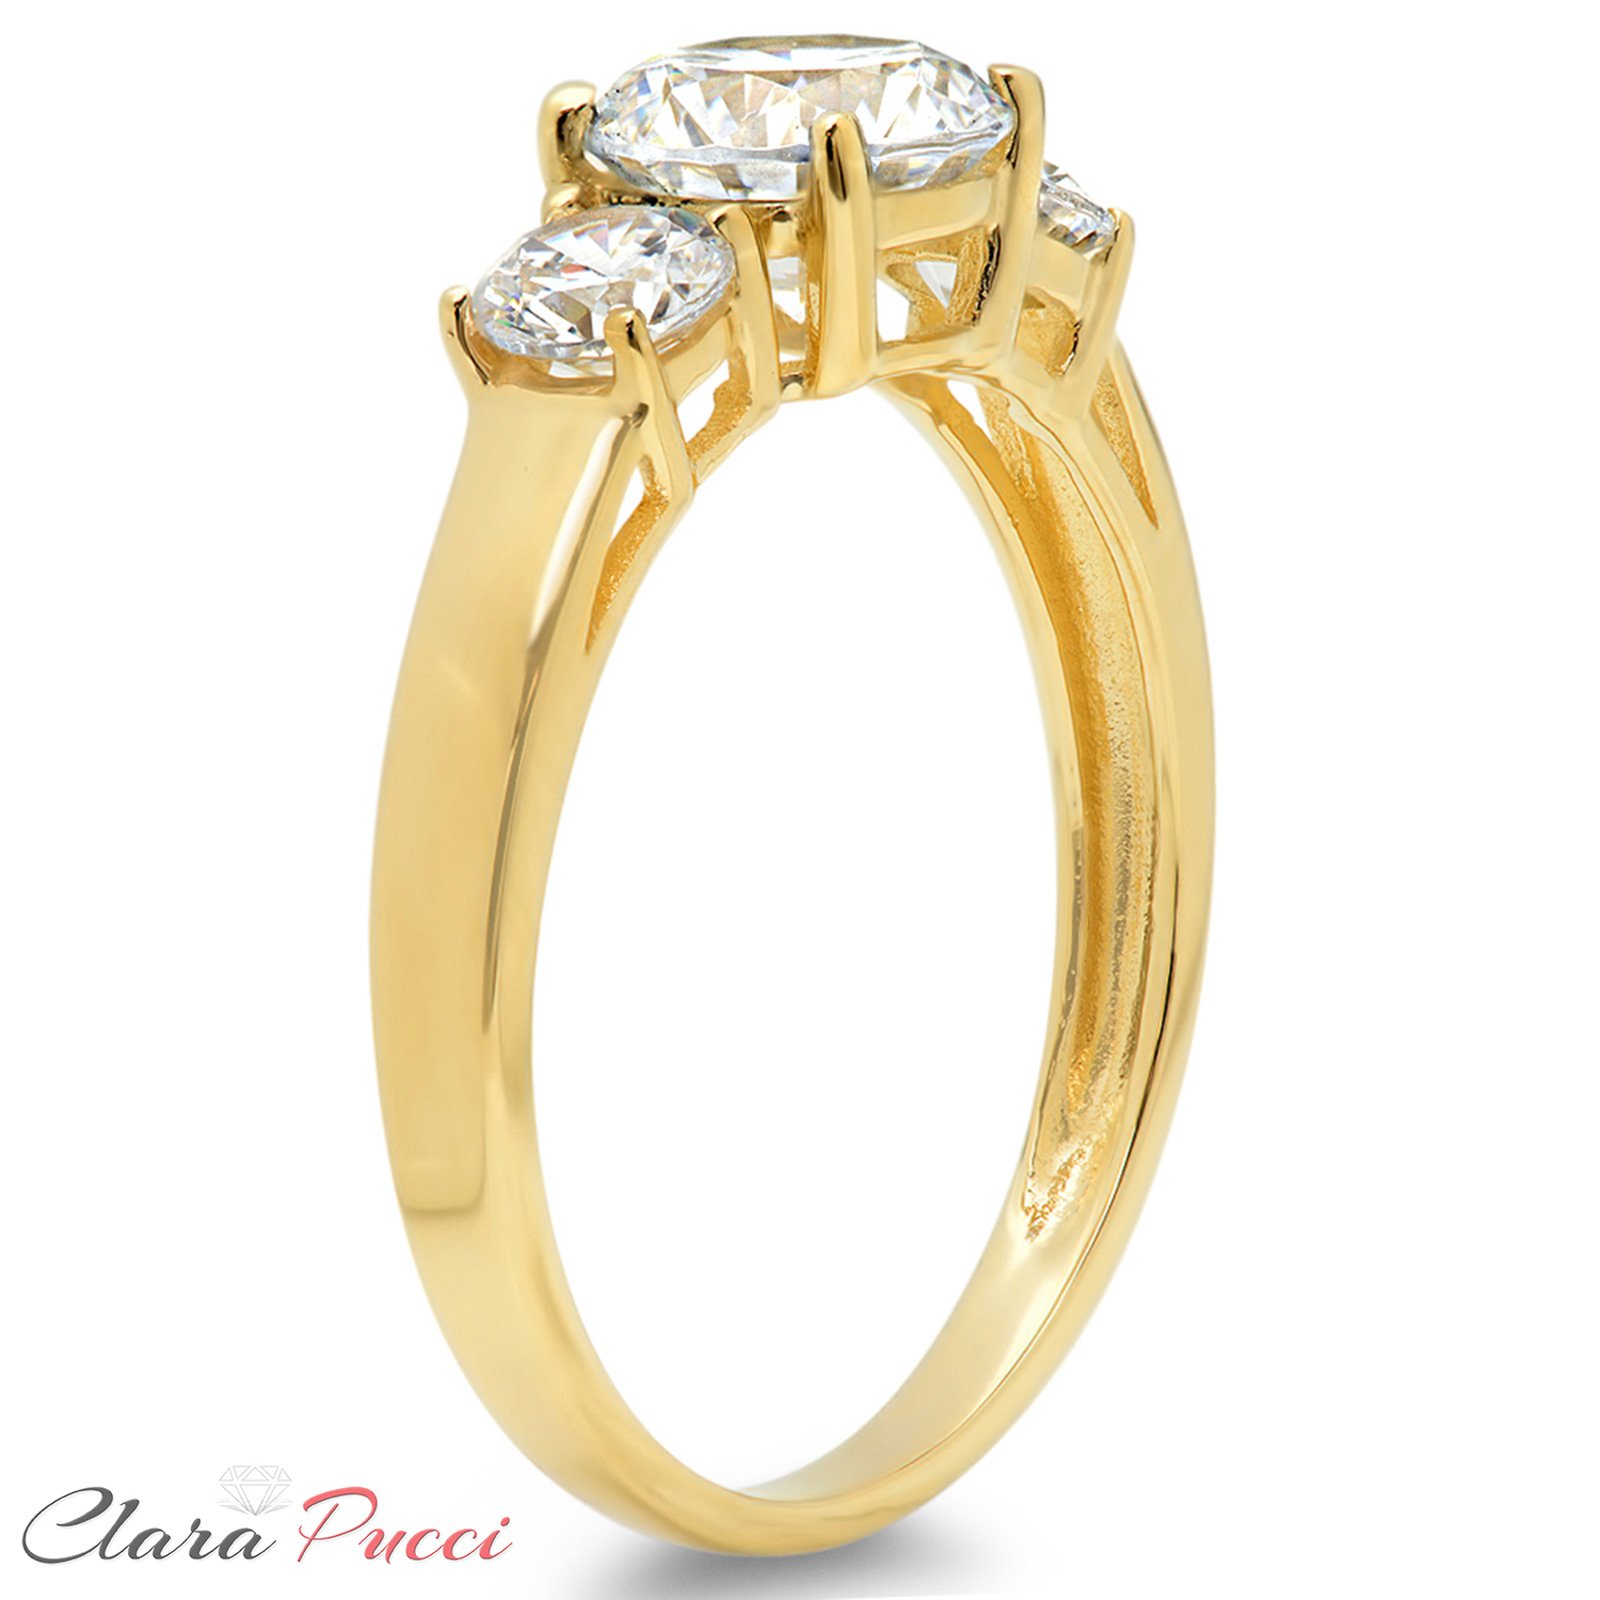 Clara Pucci 1.44ct Brilliant Round Cut Solitaire three stone Genuine Moissanite Ideal VVS1 D & Simulated Diamond Engagement Promise Statement Anniversary Bridal Wedding Ring Solid 14k Yellow Gold